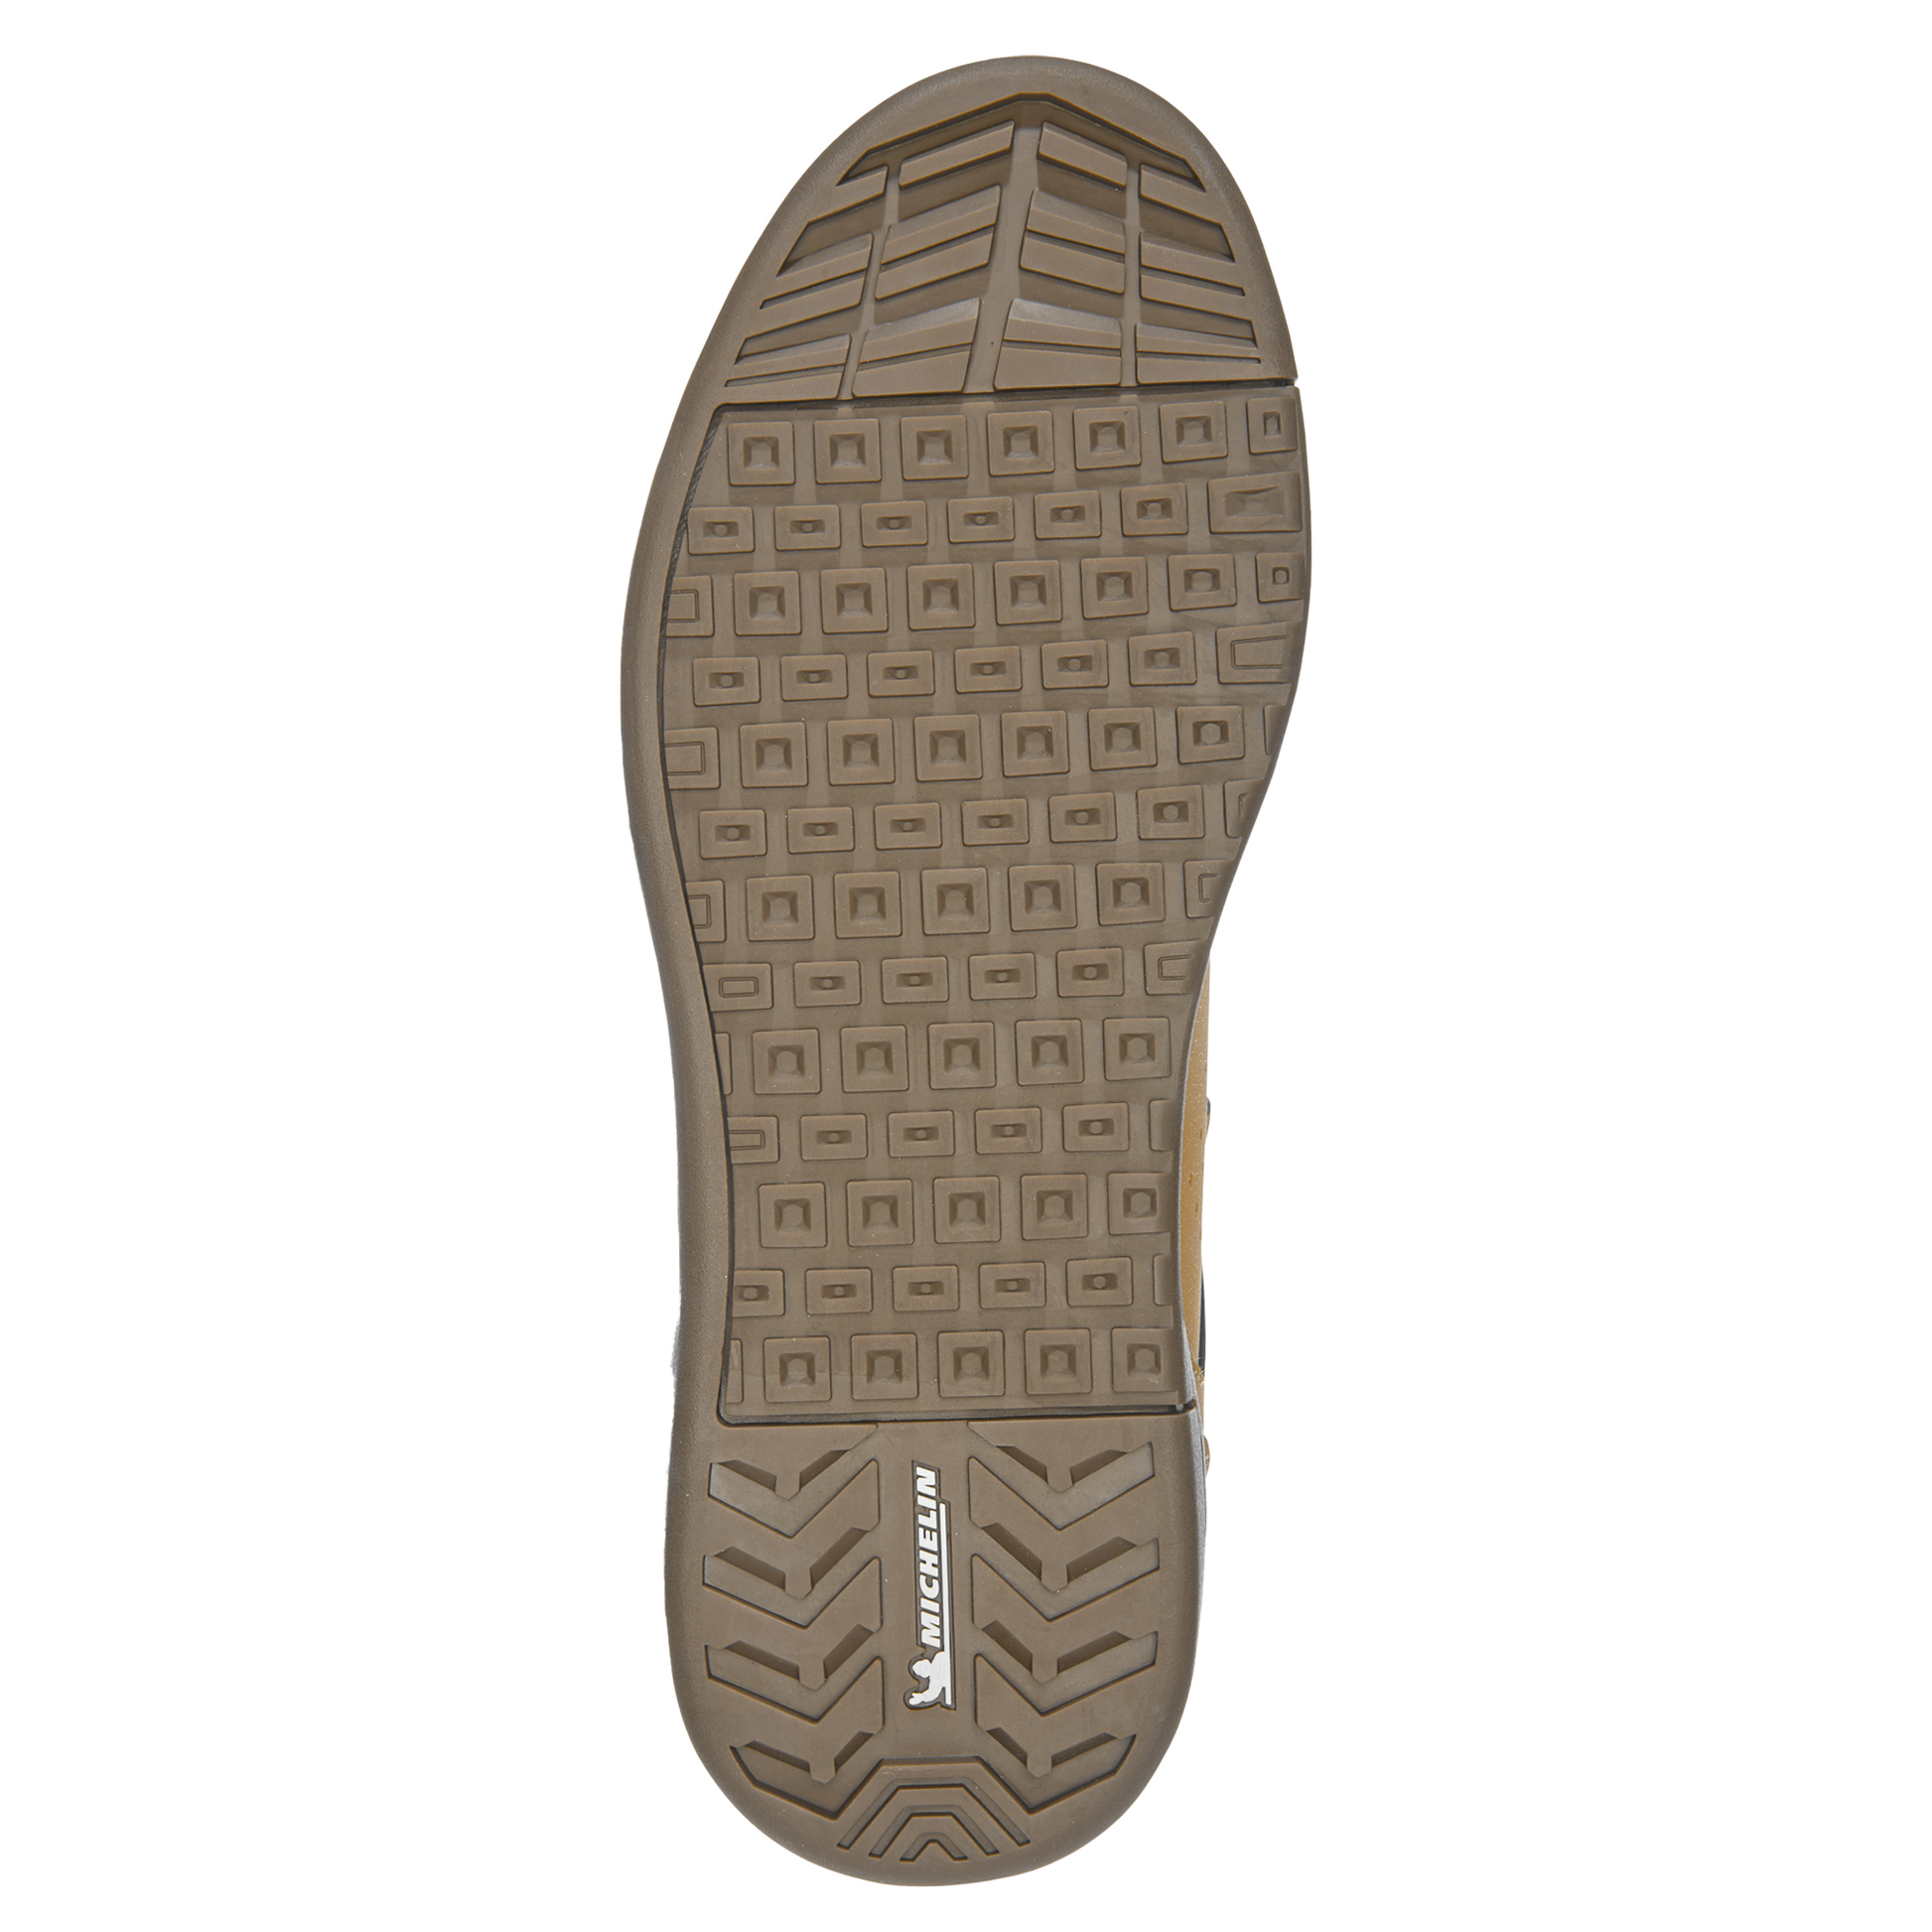 Etnies Camber Mid Michelin x TFTF Flat Shoes - US 9.0 - Tan - Gum - Image 4